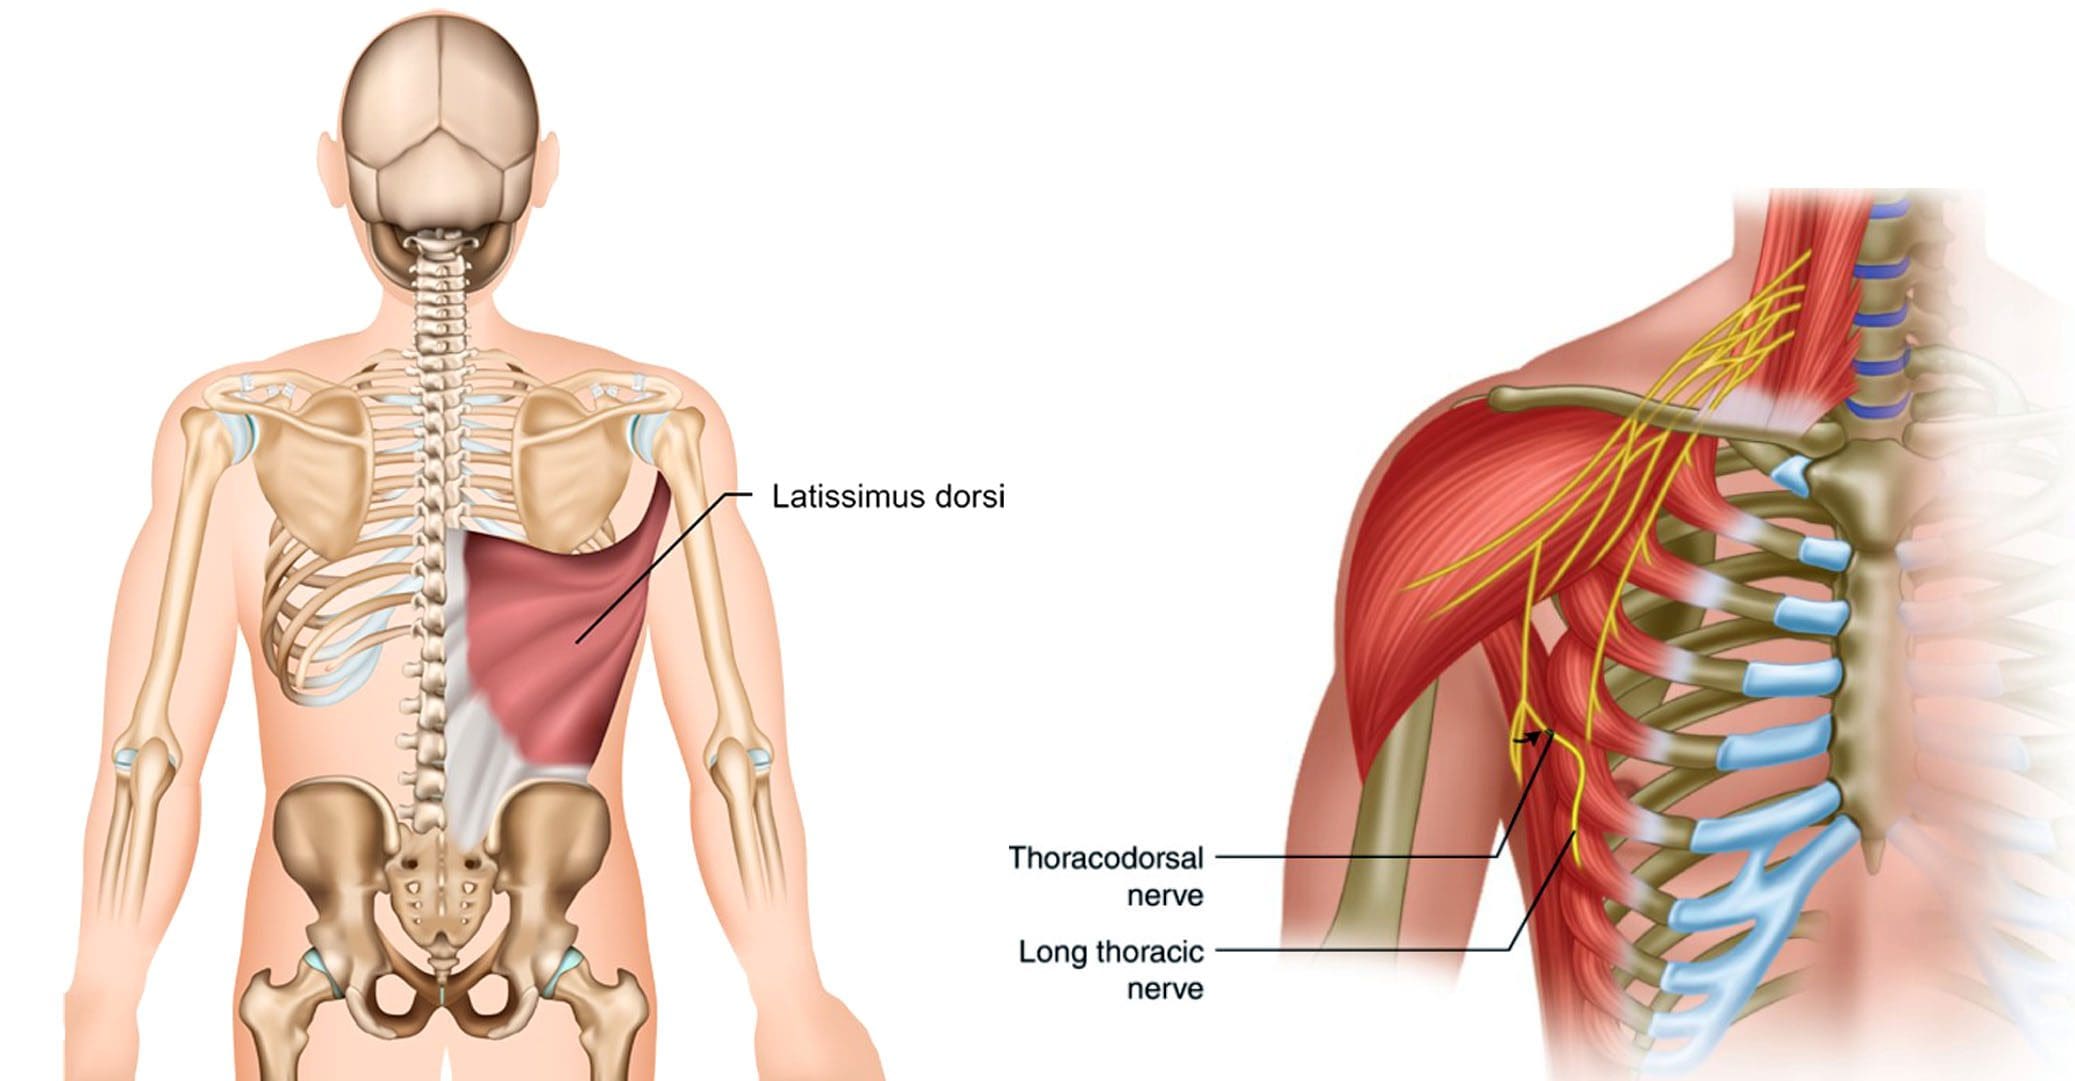 Understanding Thoracodorsal Nerve Injury: What You Should Know